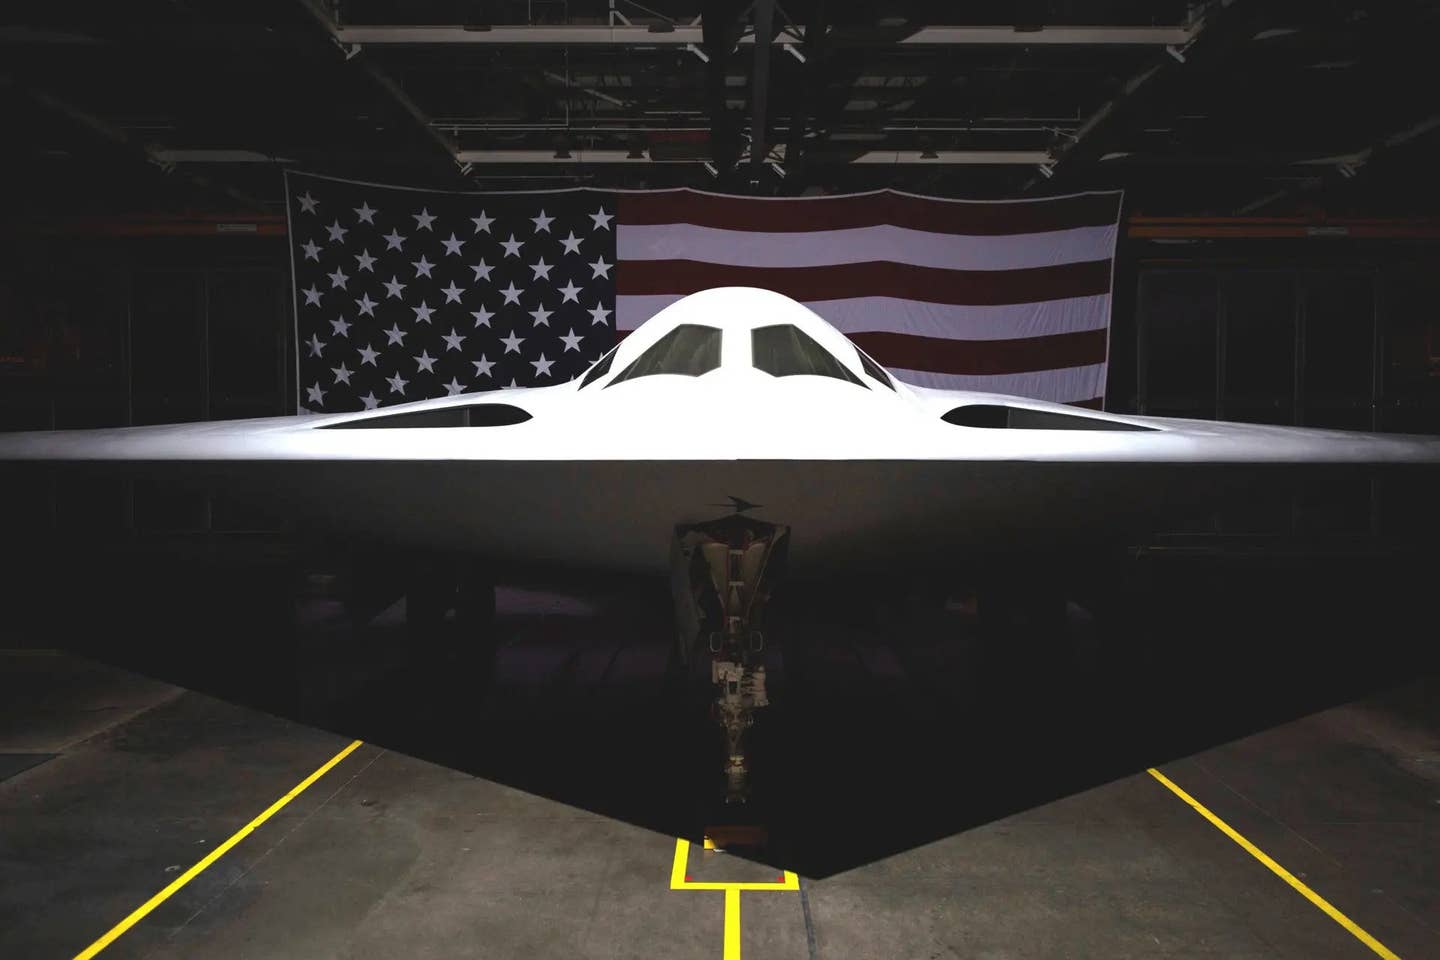 A view of the B-21 Raider released by Northrop Grumman